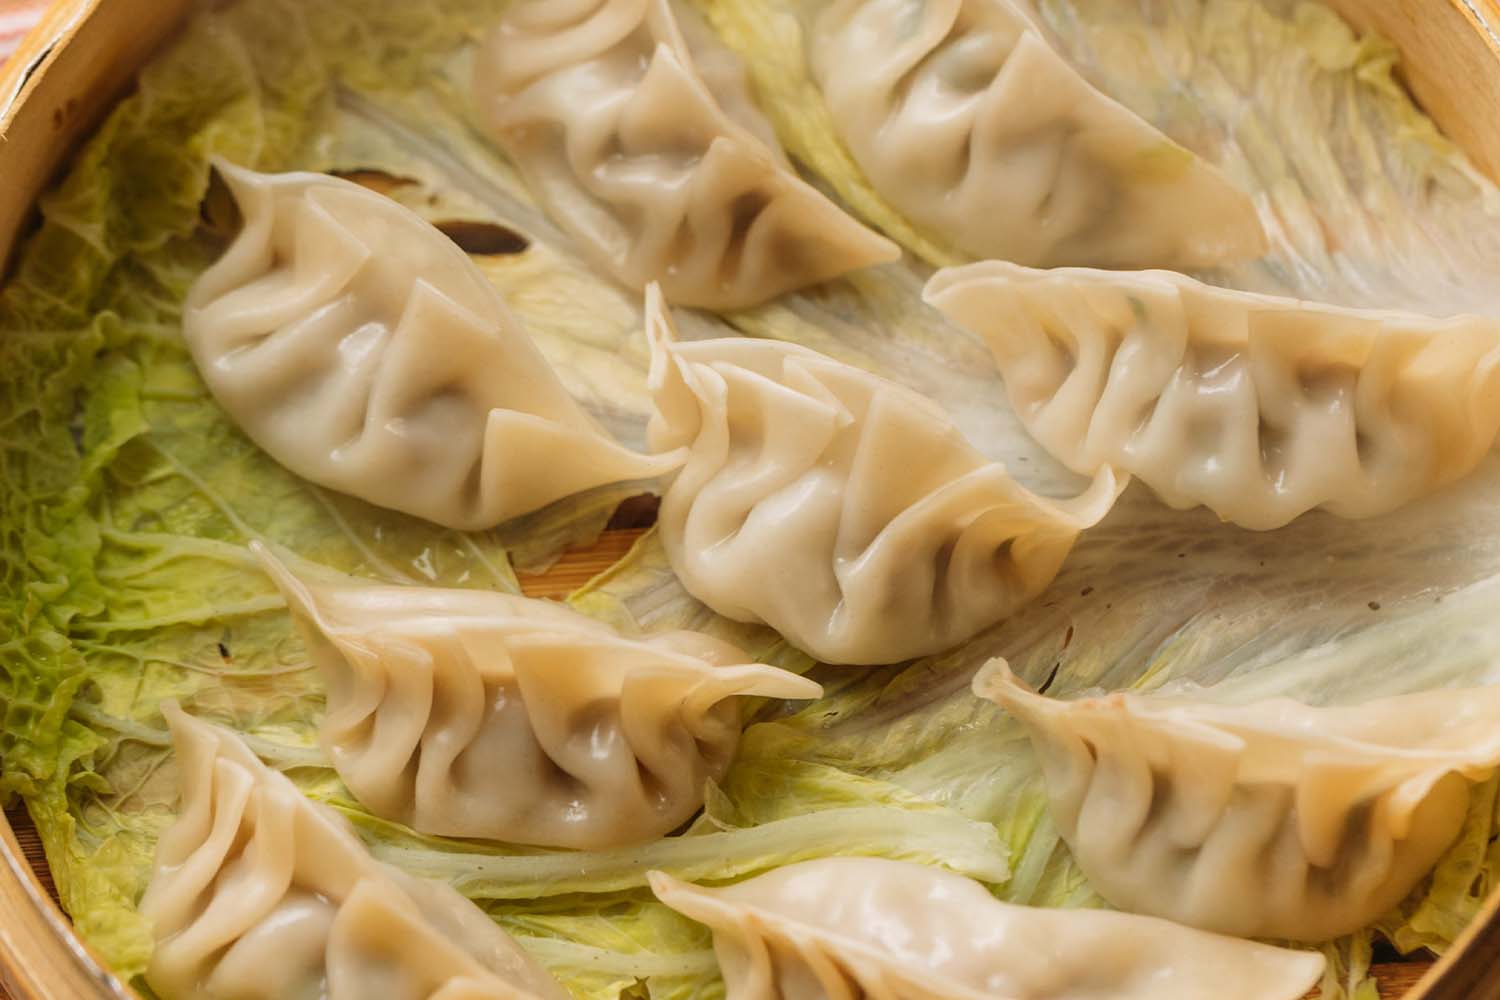 How To Elevate The Texture Of Trader Joe's Soup Dumplings